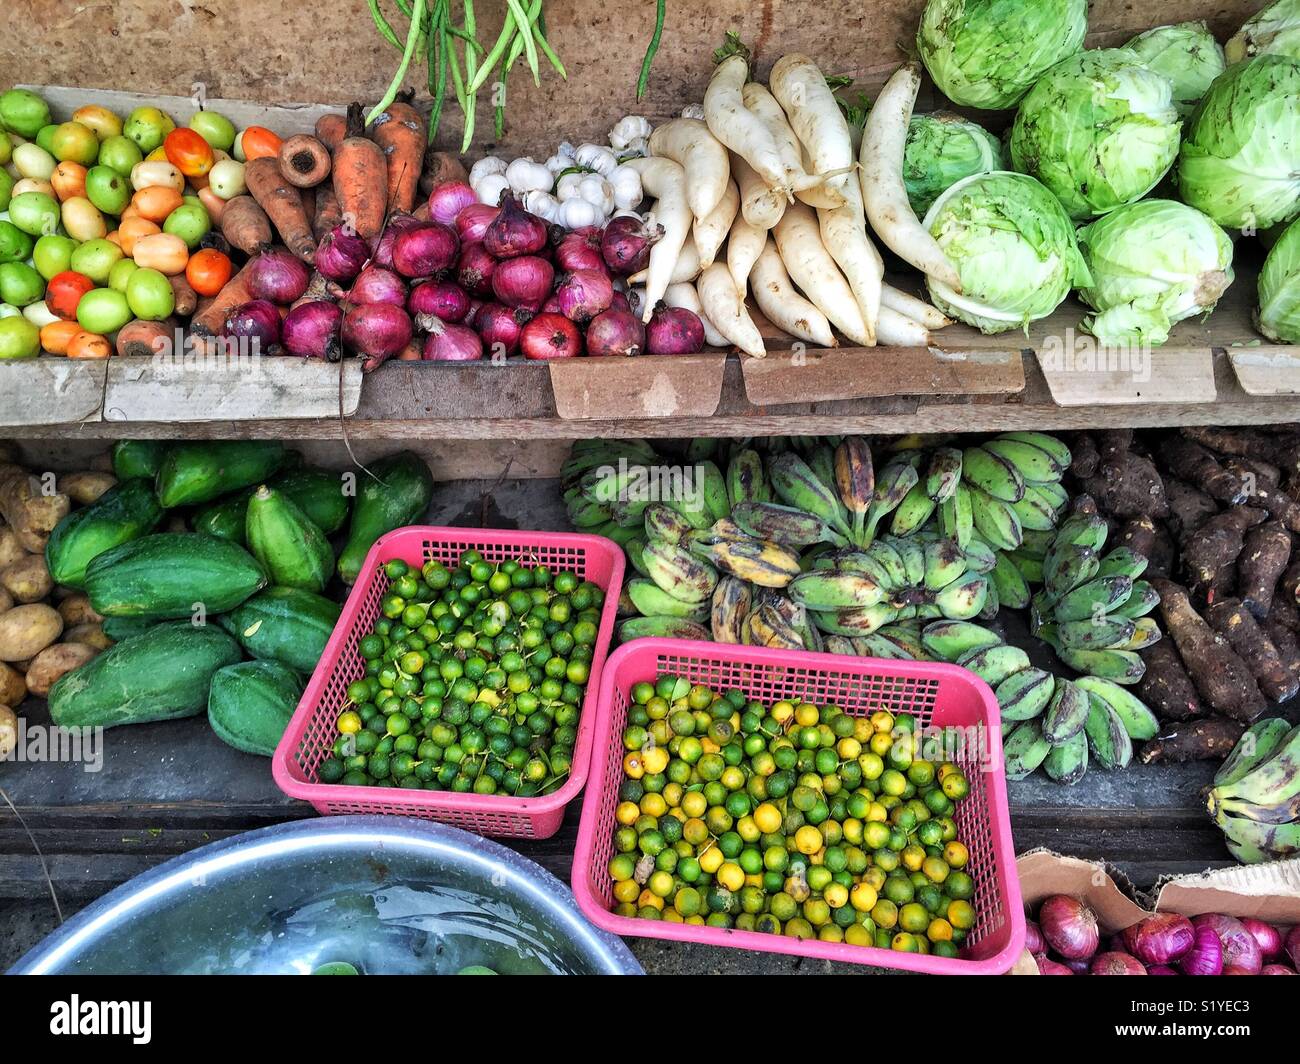 Tropical fruits and vegetables on makeshift street stand in the Philippines Stock Photo